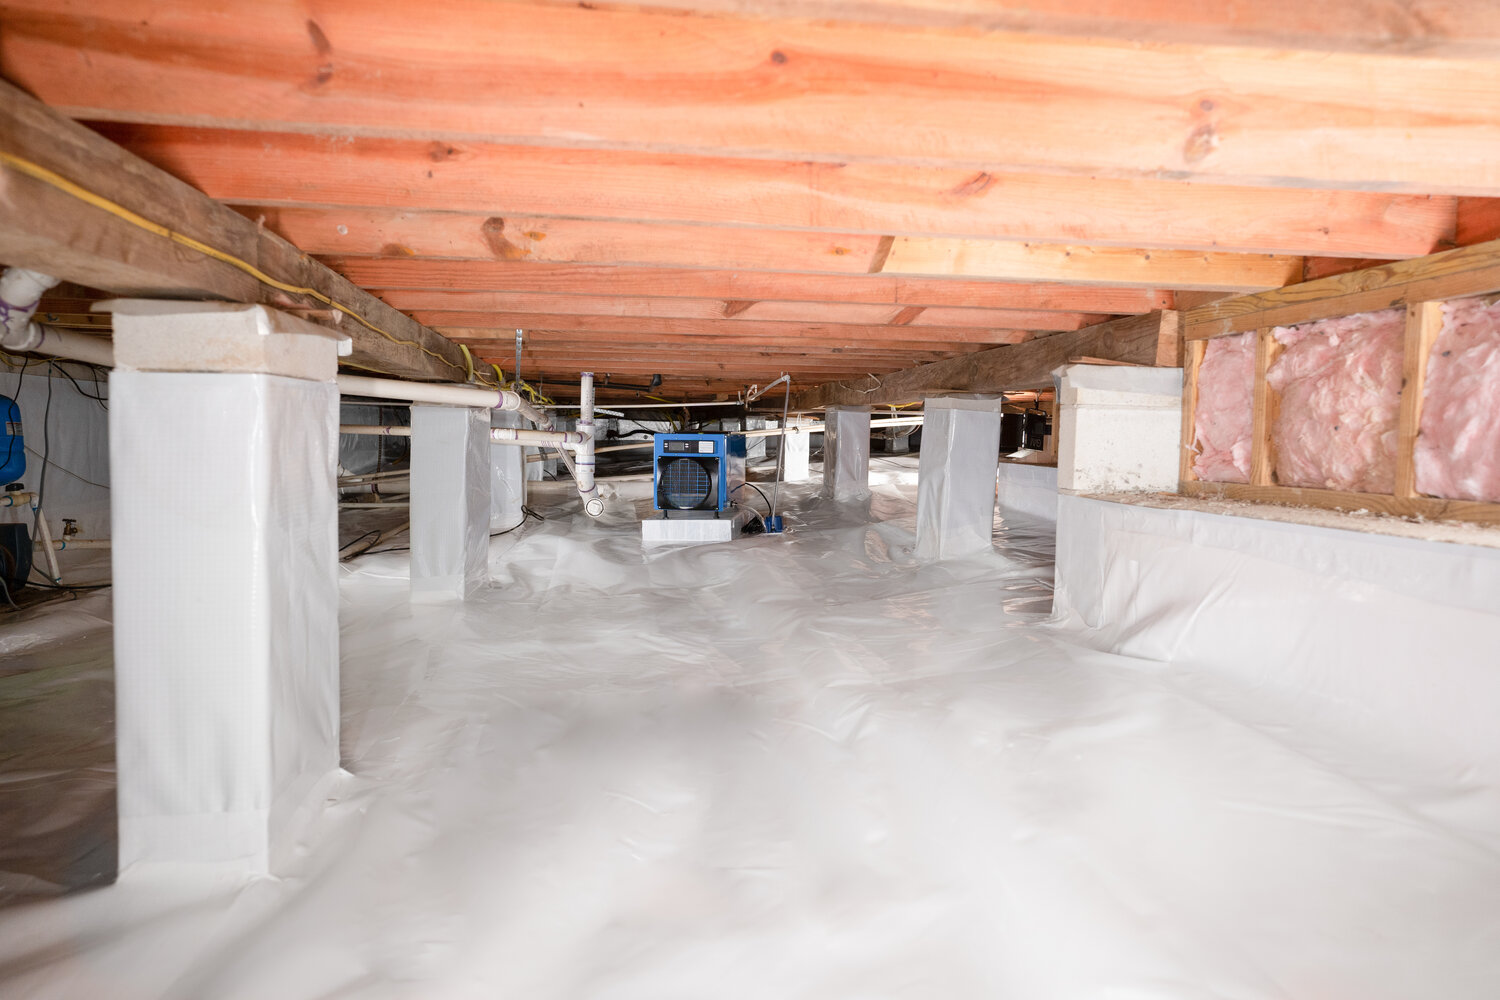 Crawl space after cleaning by JES Foundation Repair.